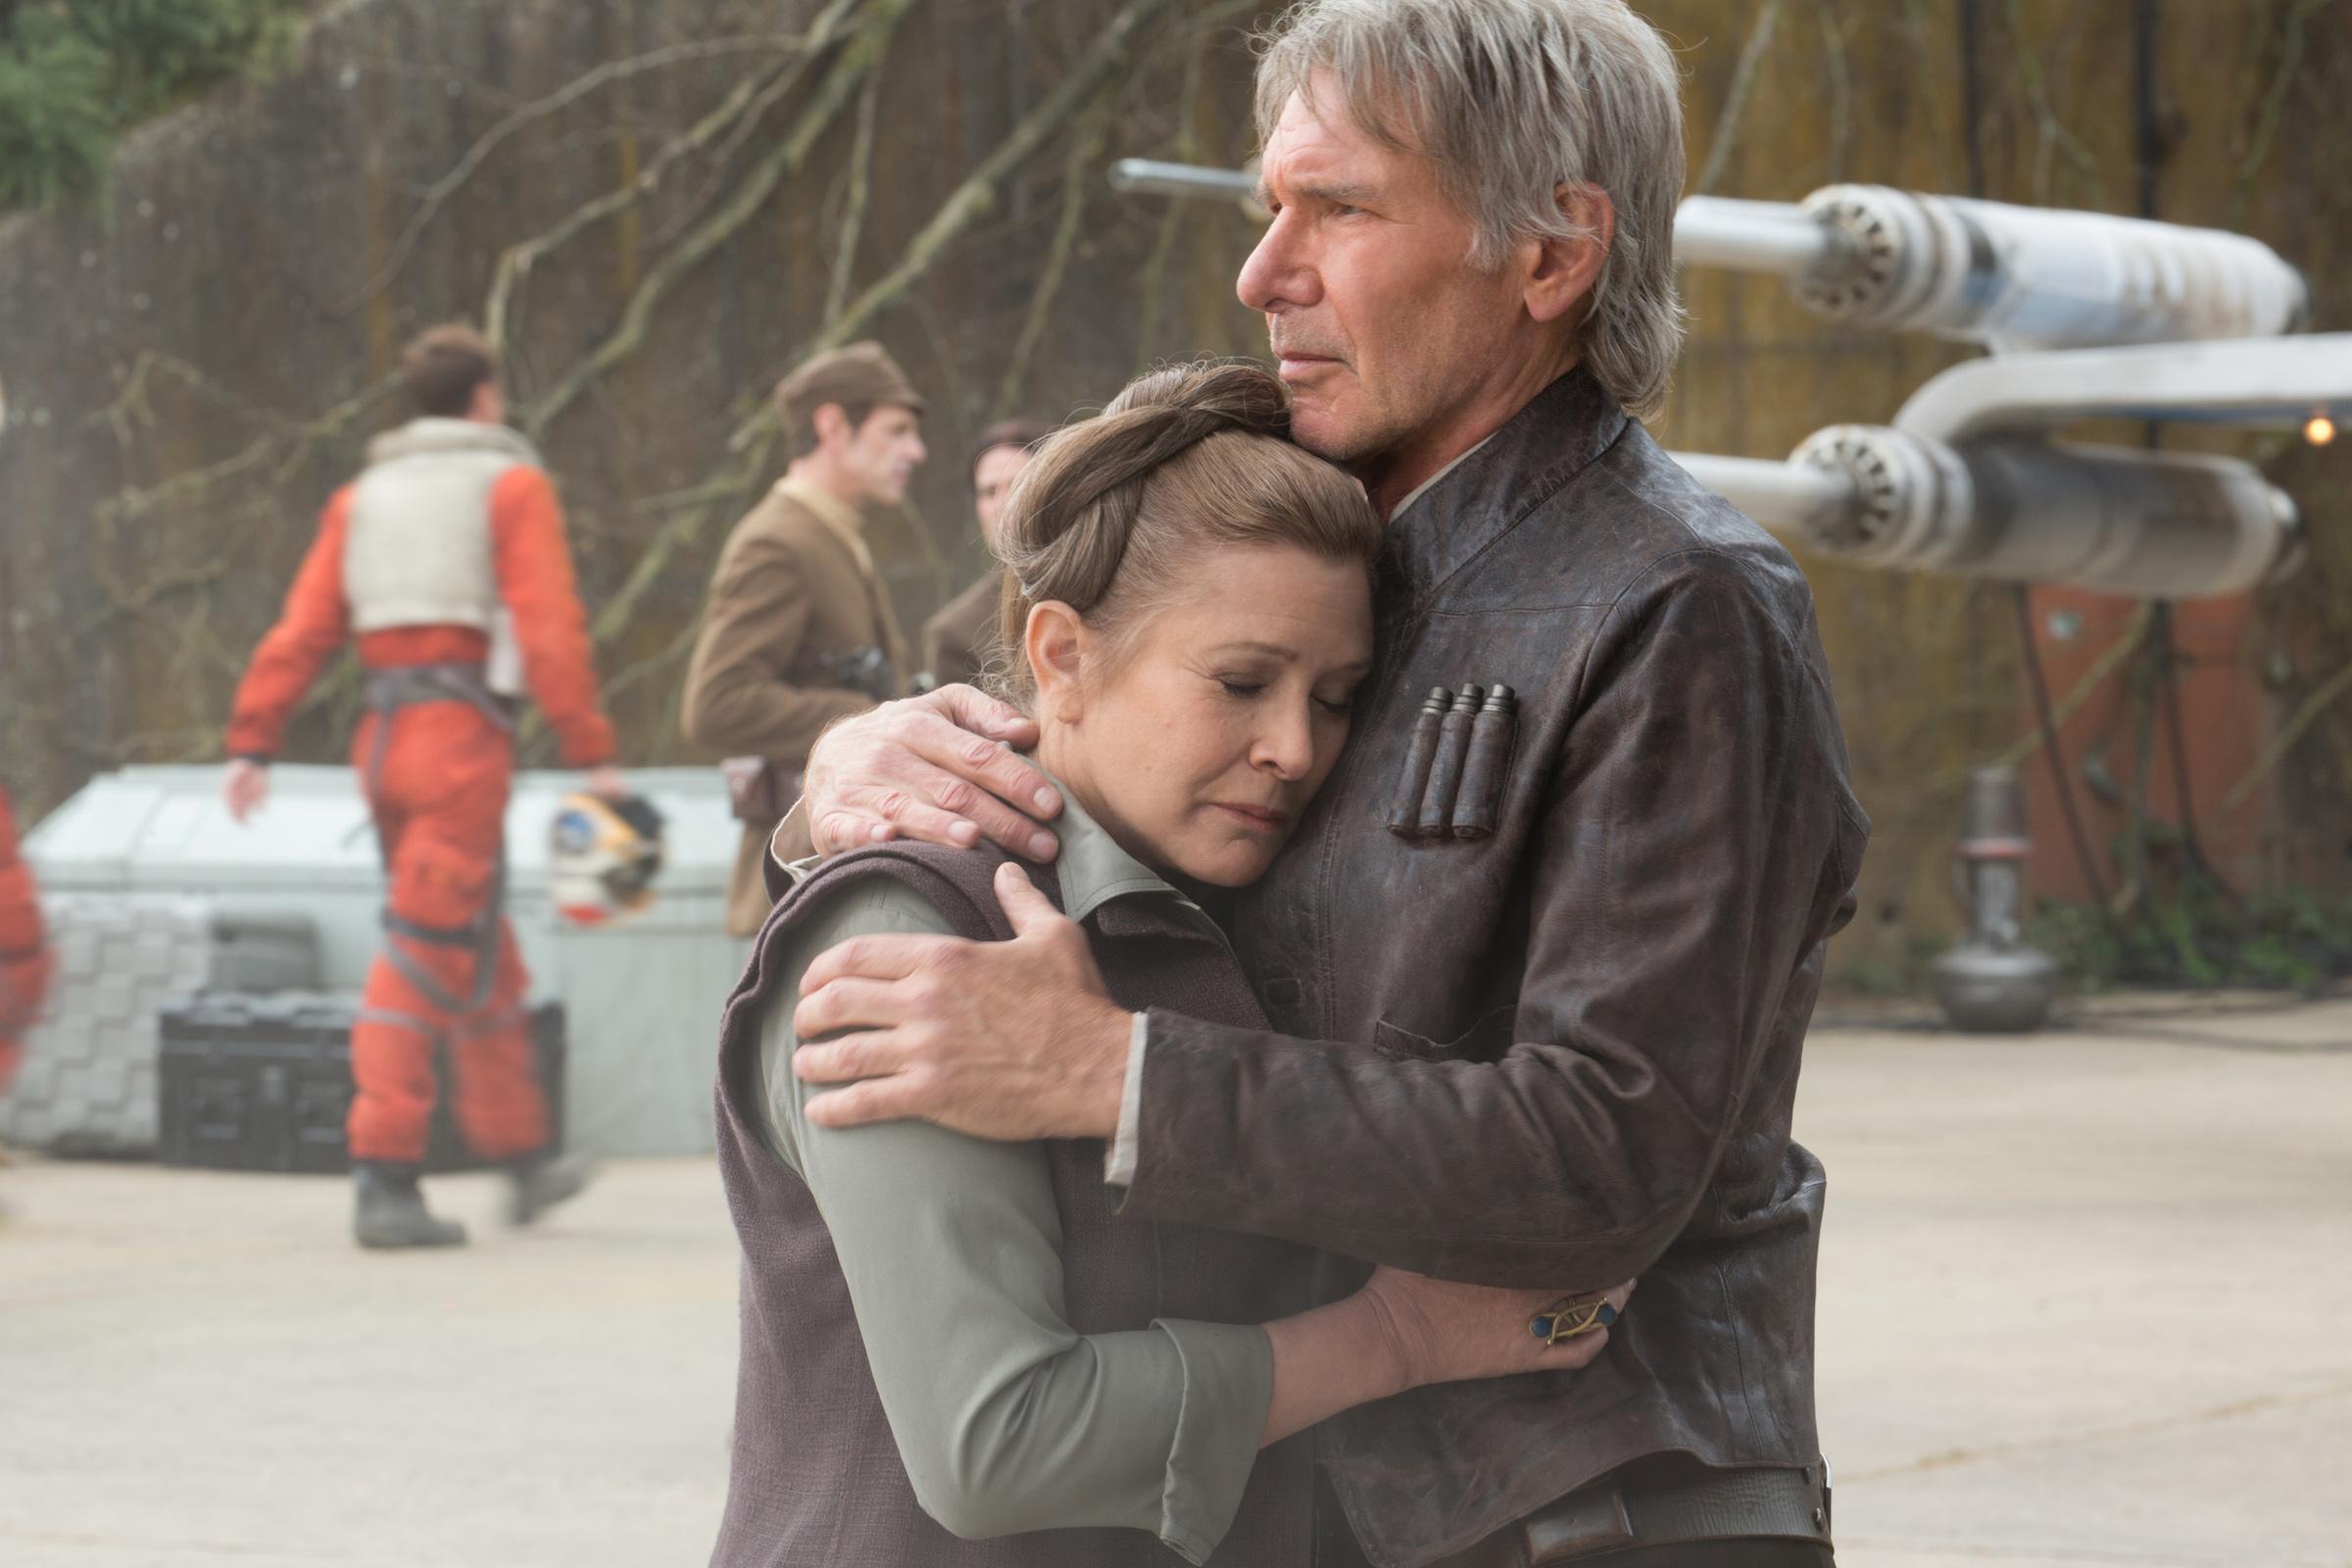 Carrie Fisher revealed she had a three-month affair with Harrison Ford while they were shooting ‘Star Wars’ (pictured here in a still from 2015’s ‘Star Wars: The Force Awakens’